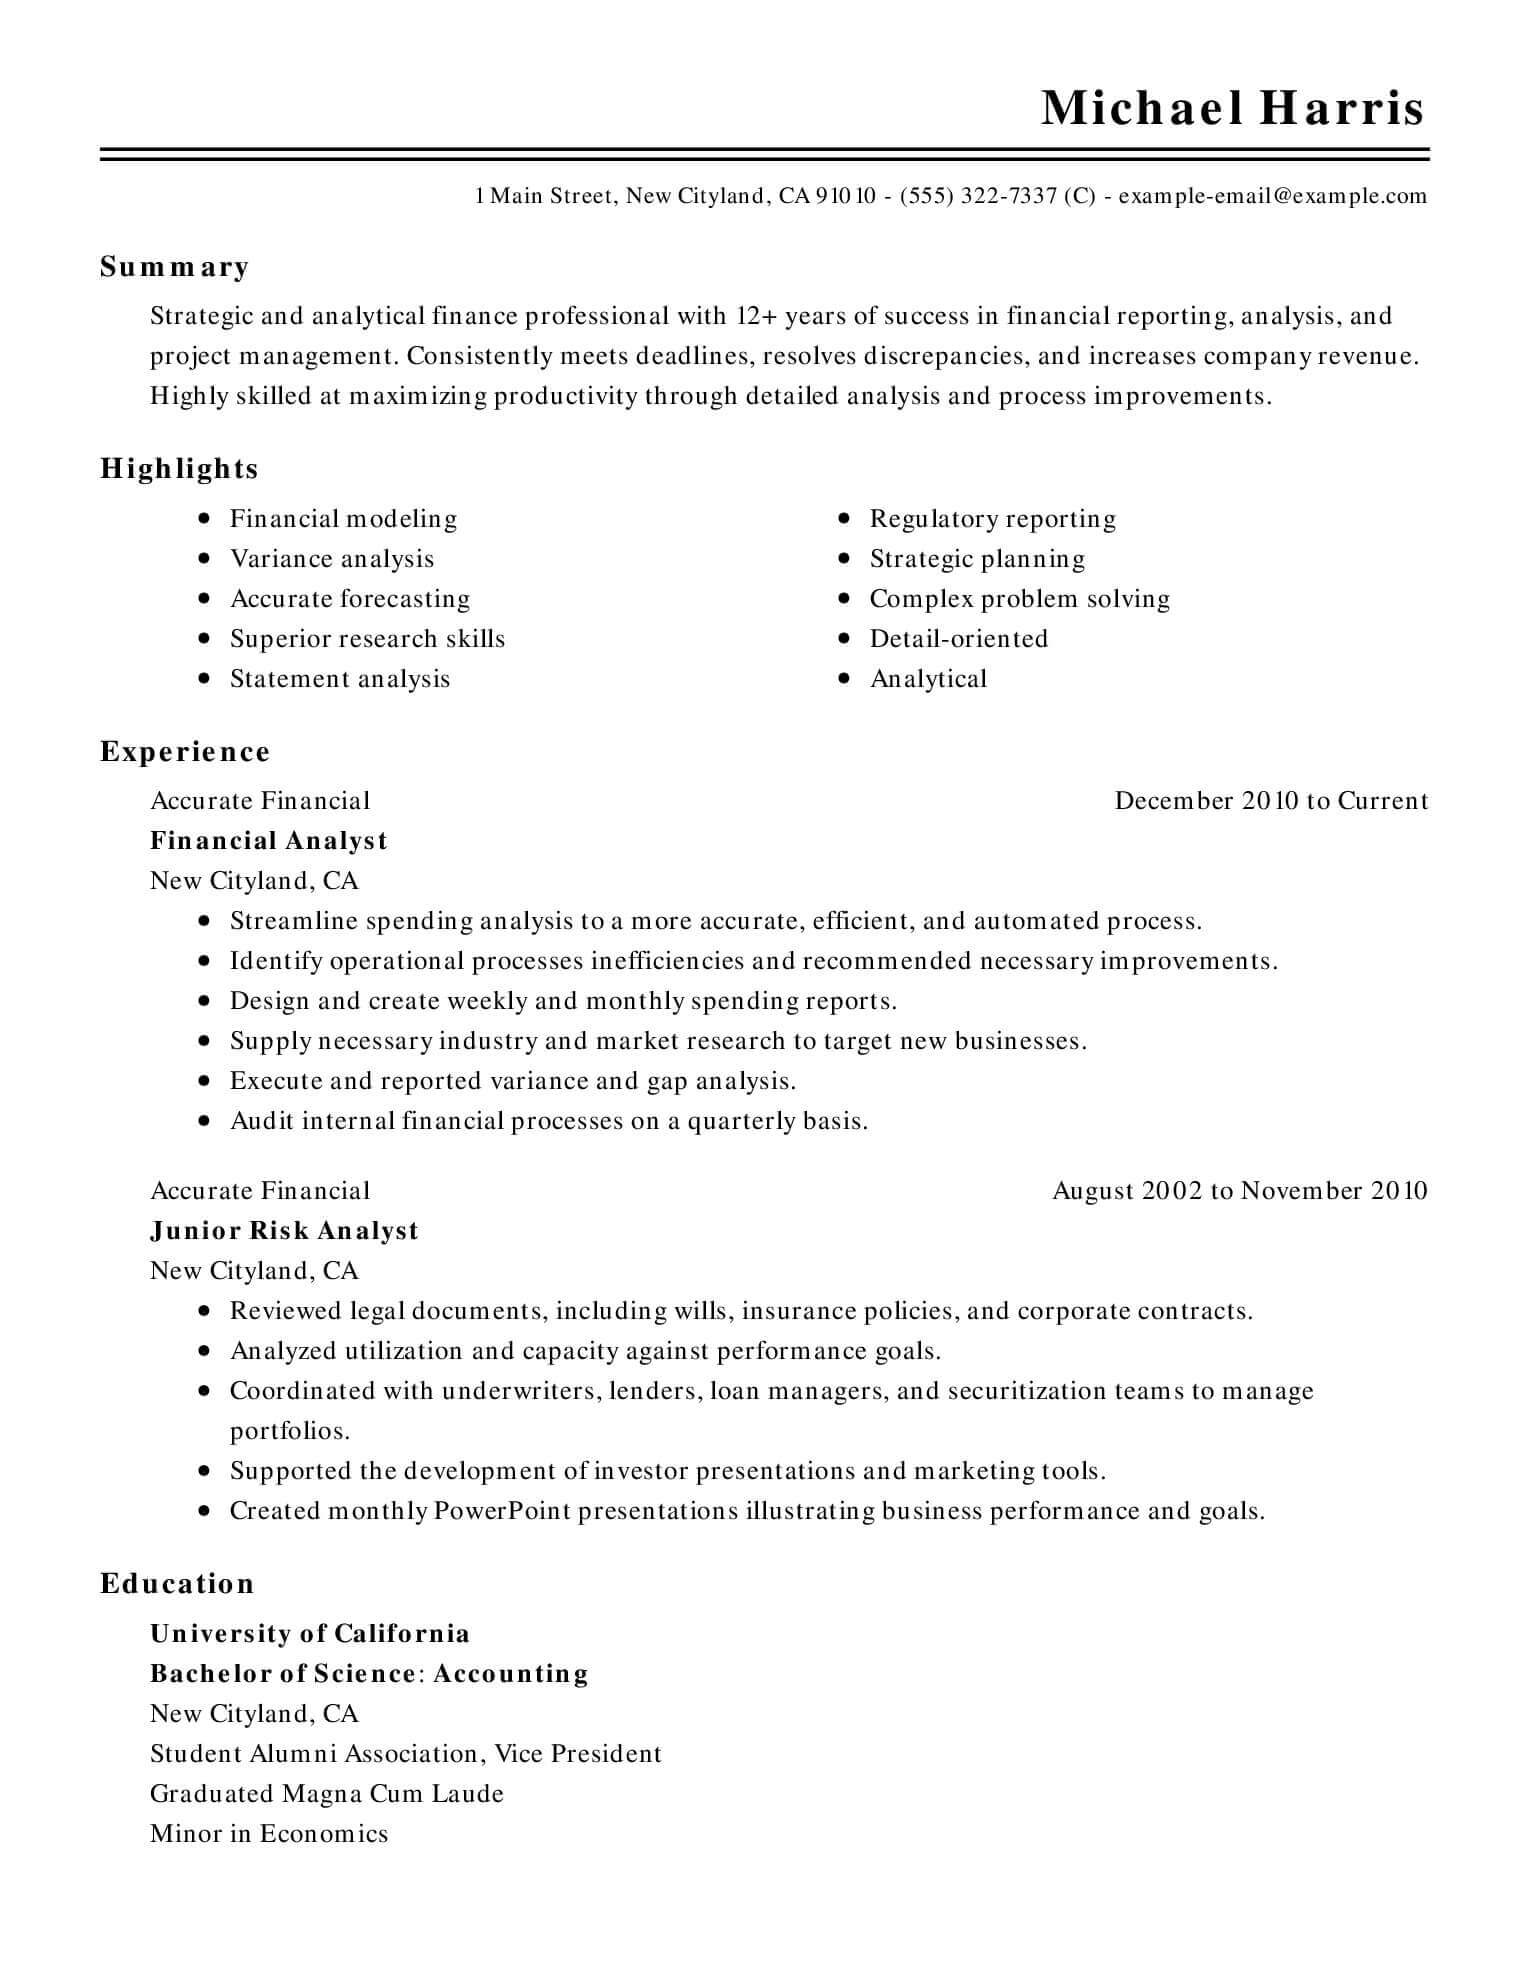 15 Of The Best Resume Templates For Microsoft Word Office Inside Resume Templates Microsoft Word 2010